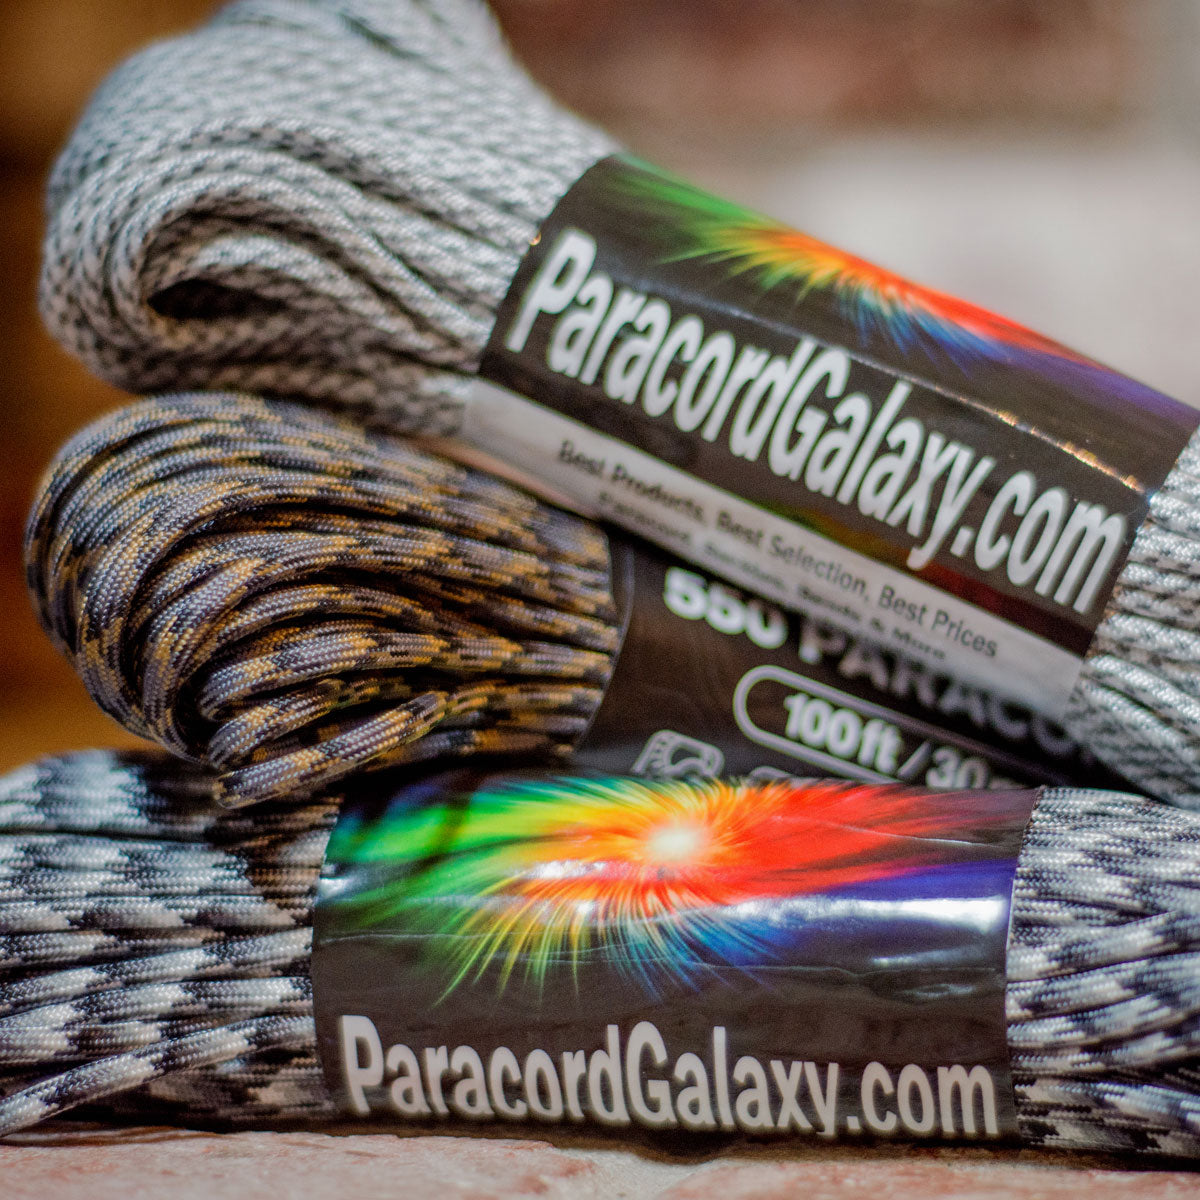 How to make a paracord bracelet (tutorials) – Paracord Galaxy